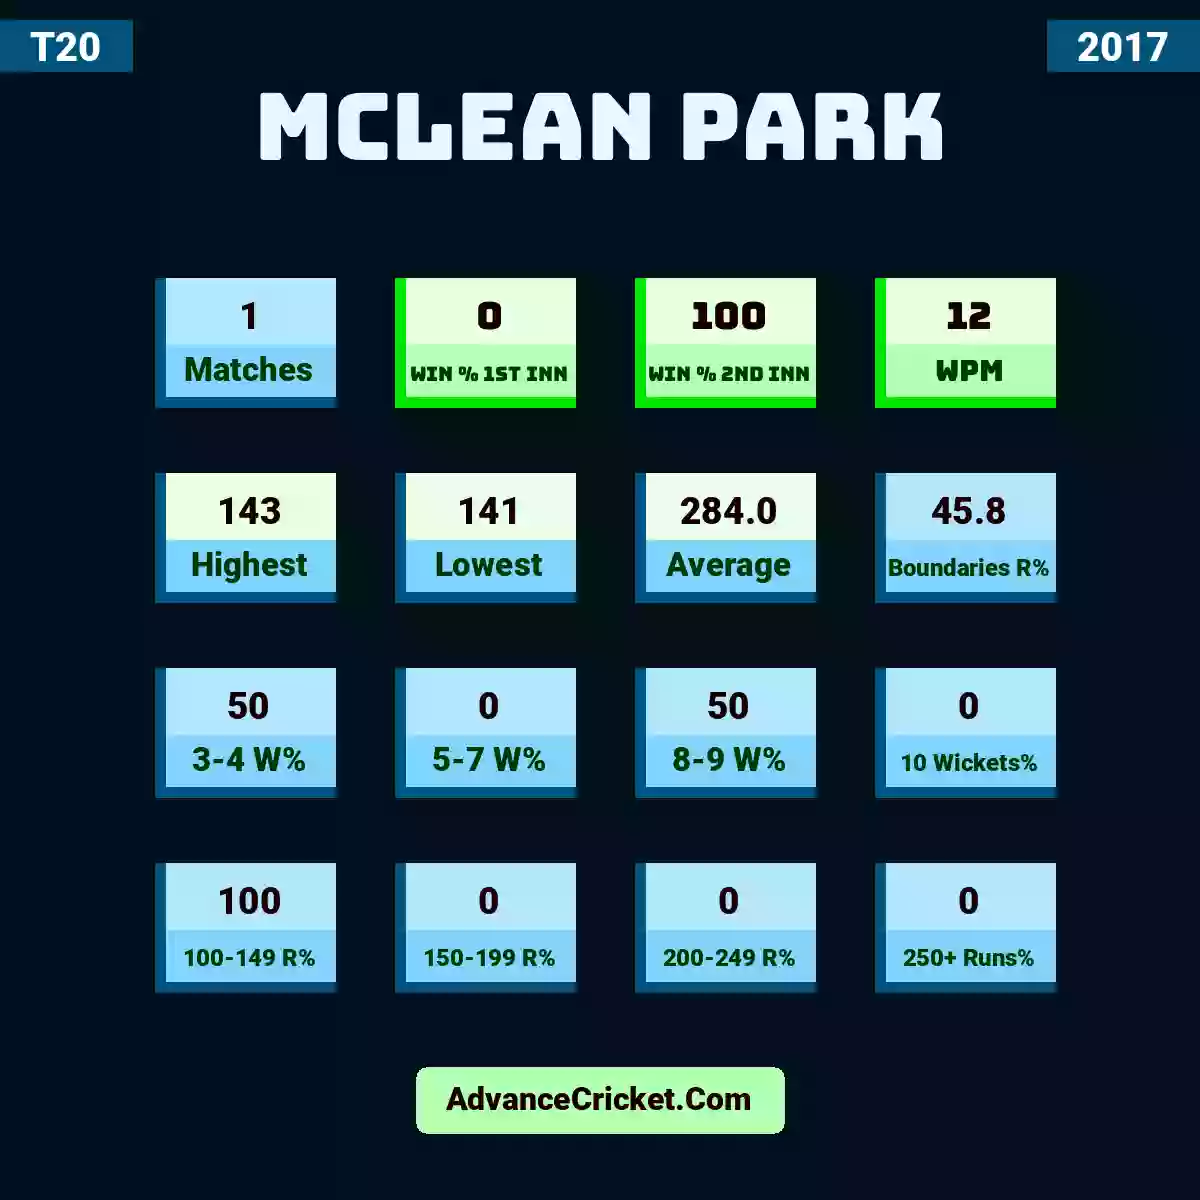 Image showing McLean Park with Matches: 1, Win % 1st Inn: 0, Win % 2nd Inn: 100, WPM: 12, Highest: 143, Lowest: 141, Average: 284.0, Boundaries R%: 45.8, 3-4 W%: 50, 5-7 W%: 0, 8-9 W%: 50, 10 Wickets%: 0, 100-149 R%: 100, 150-199 R%: 0, 200-249 R%: 0, 250+ Runs%: 0.